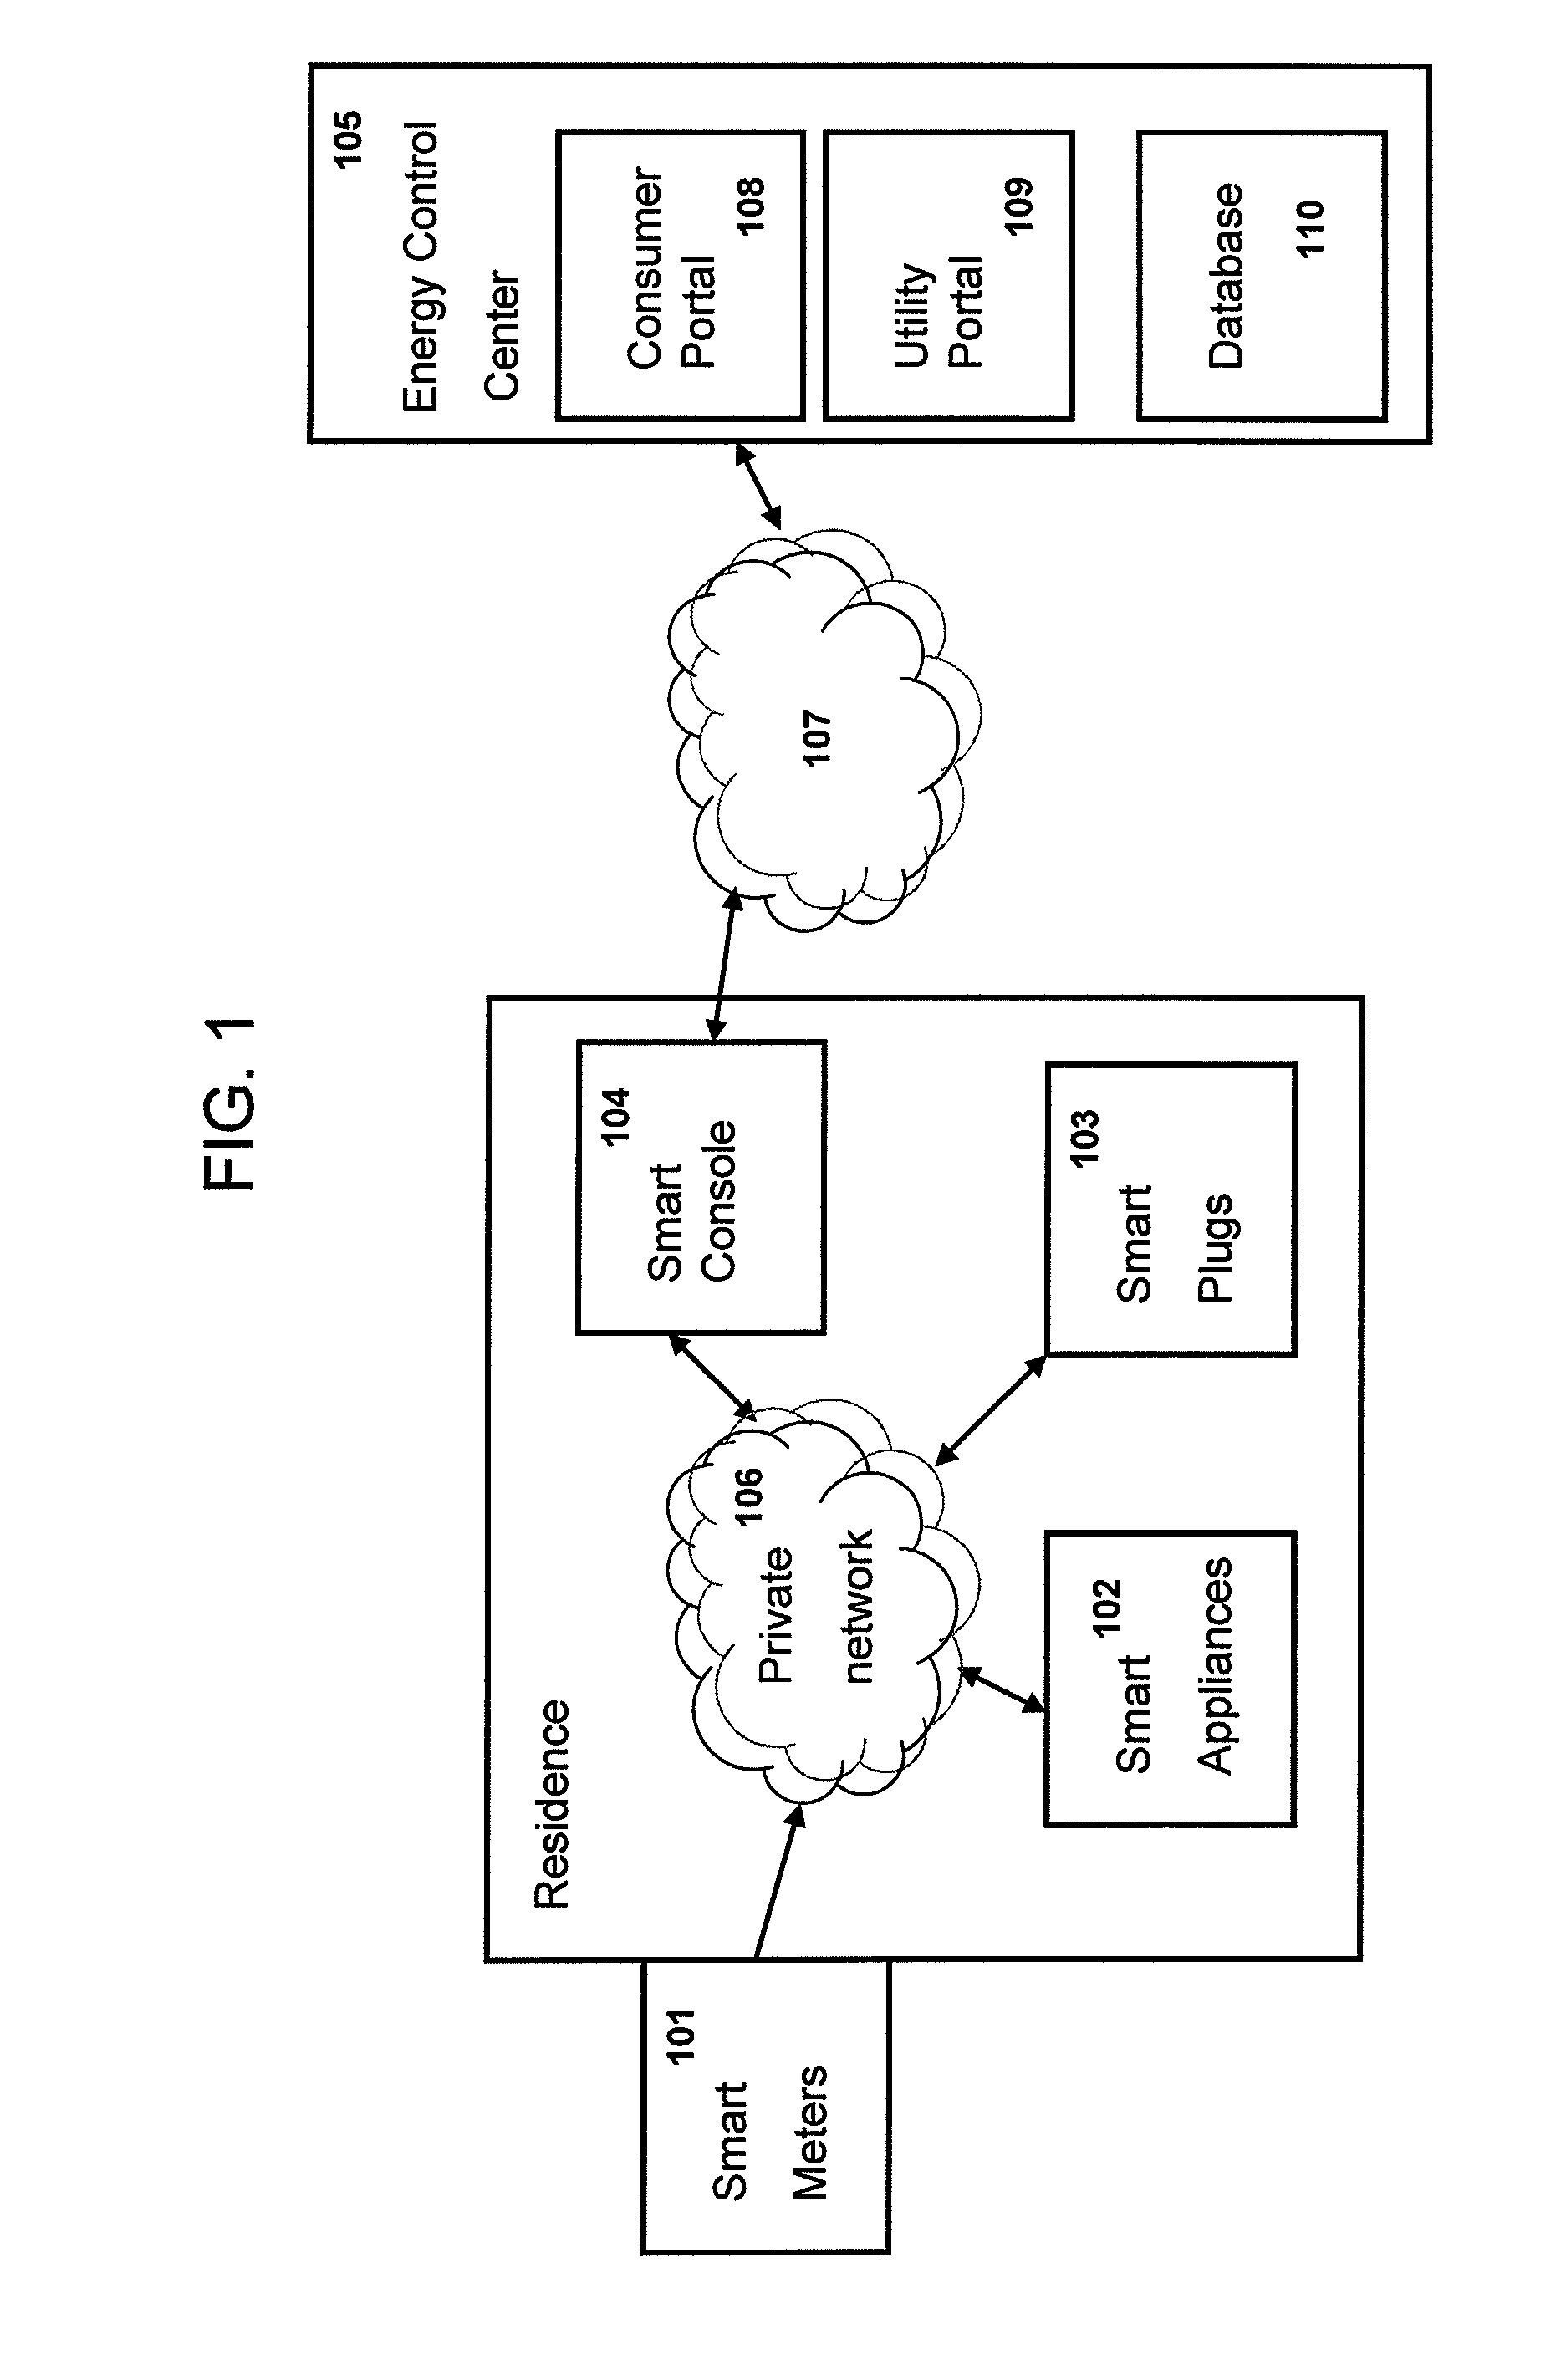 Method and system to monitor and control energy